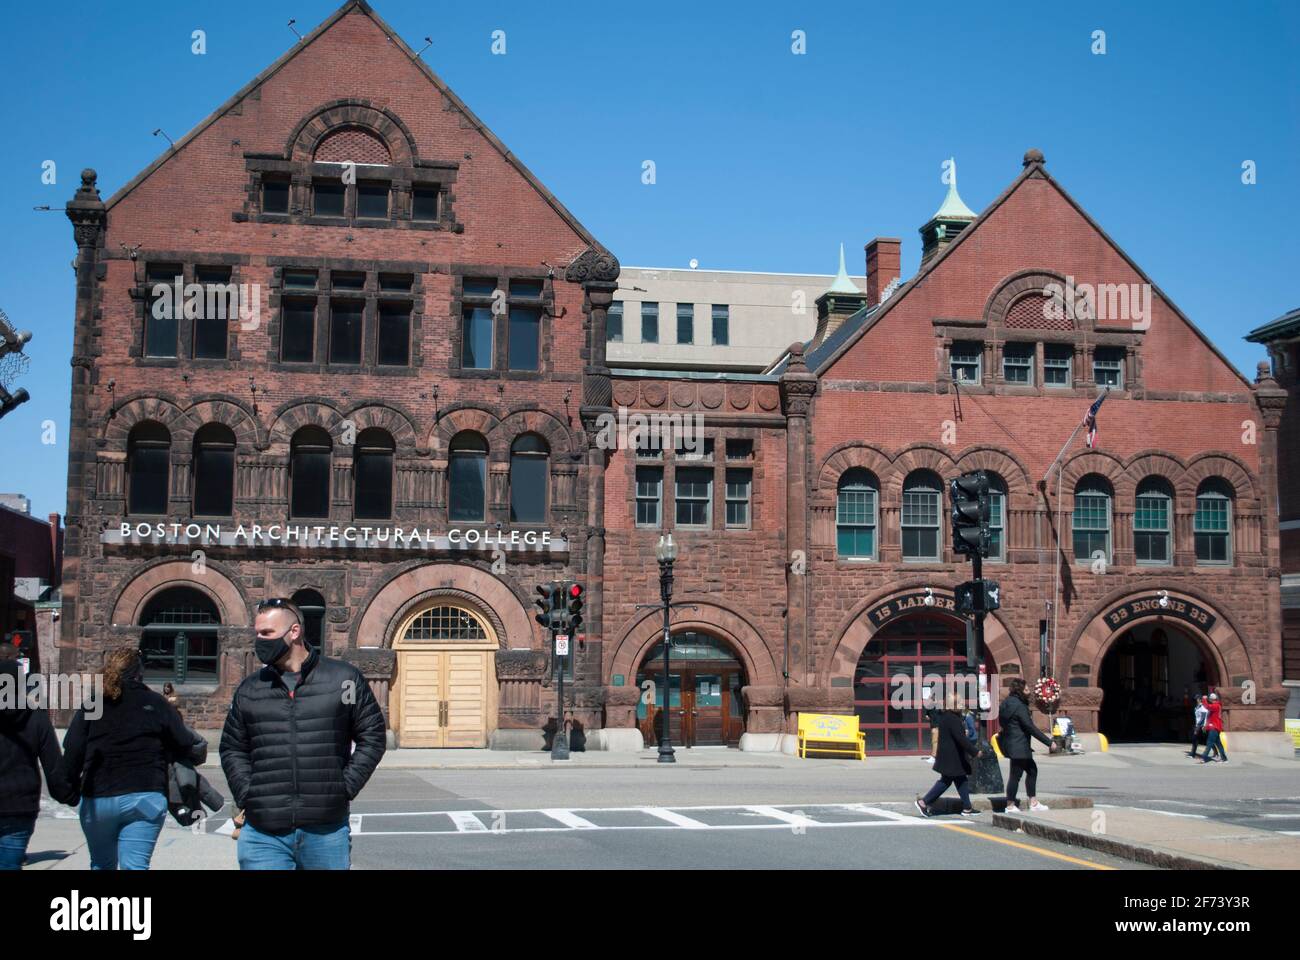 People in masks are walking in a front of the historical building. Stock Photo